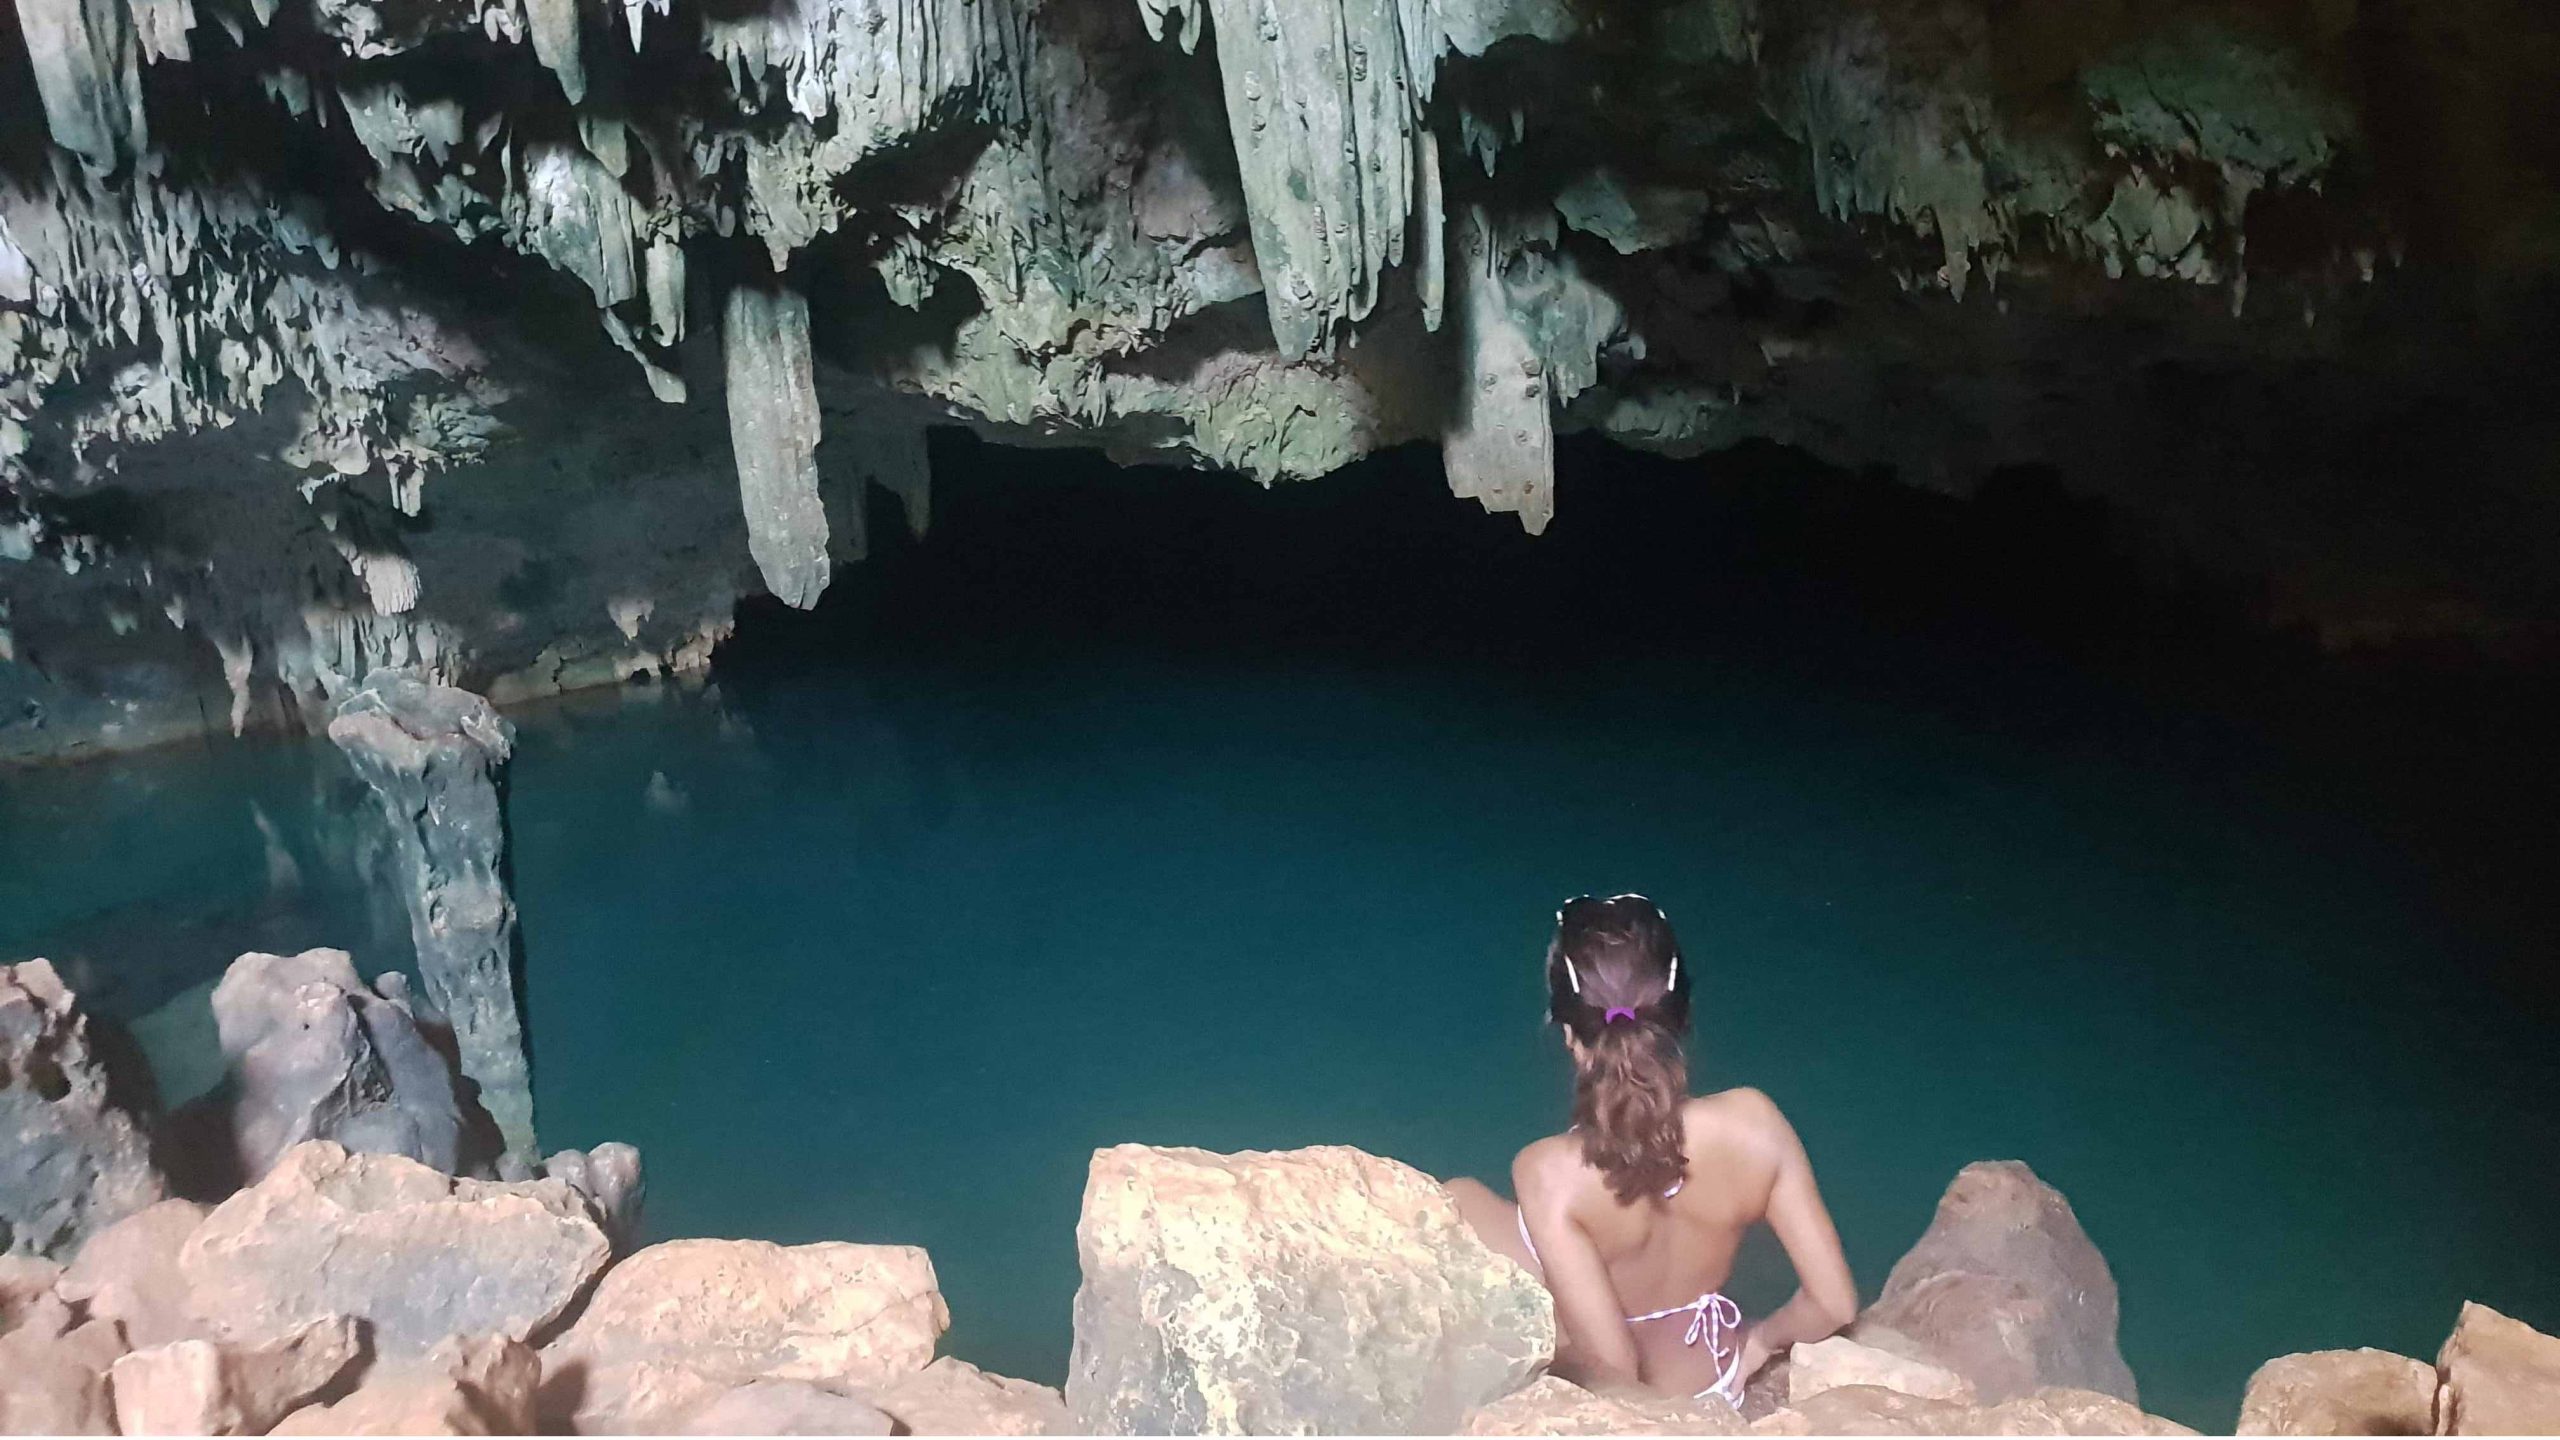 A view of a stalactite cave with water. The girl is sitting in a quarry and is going for a swim. Rangko Cave | Bespoke Indonesia Holiday.